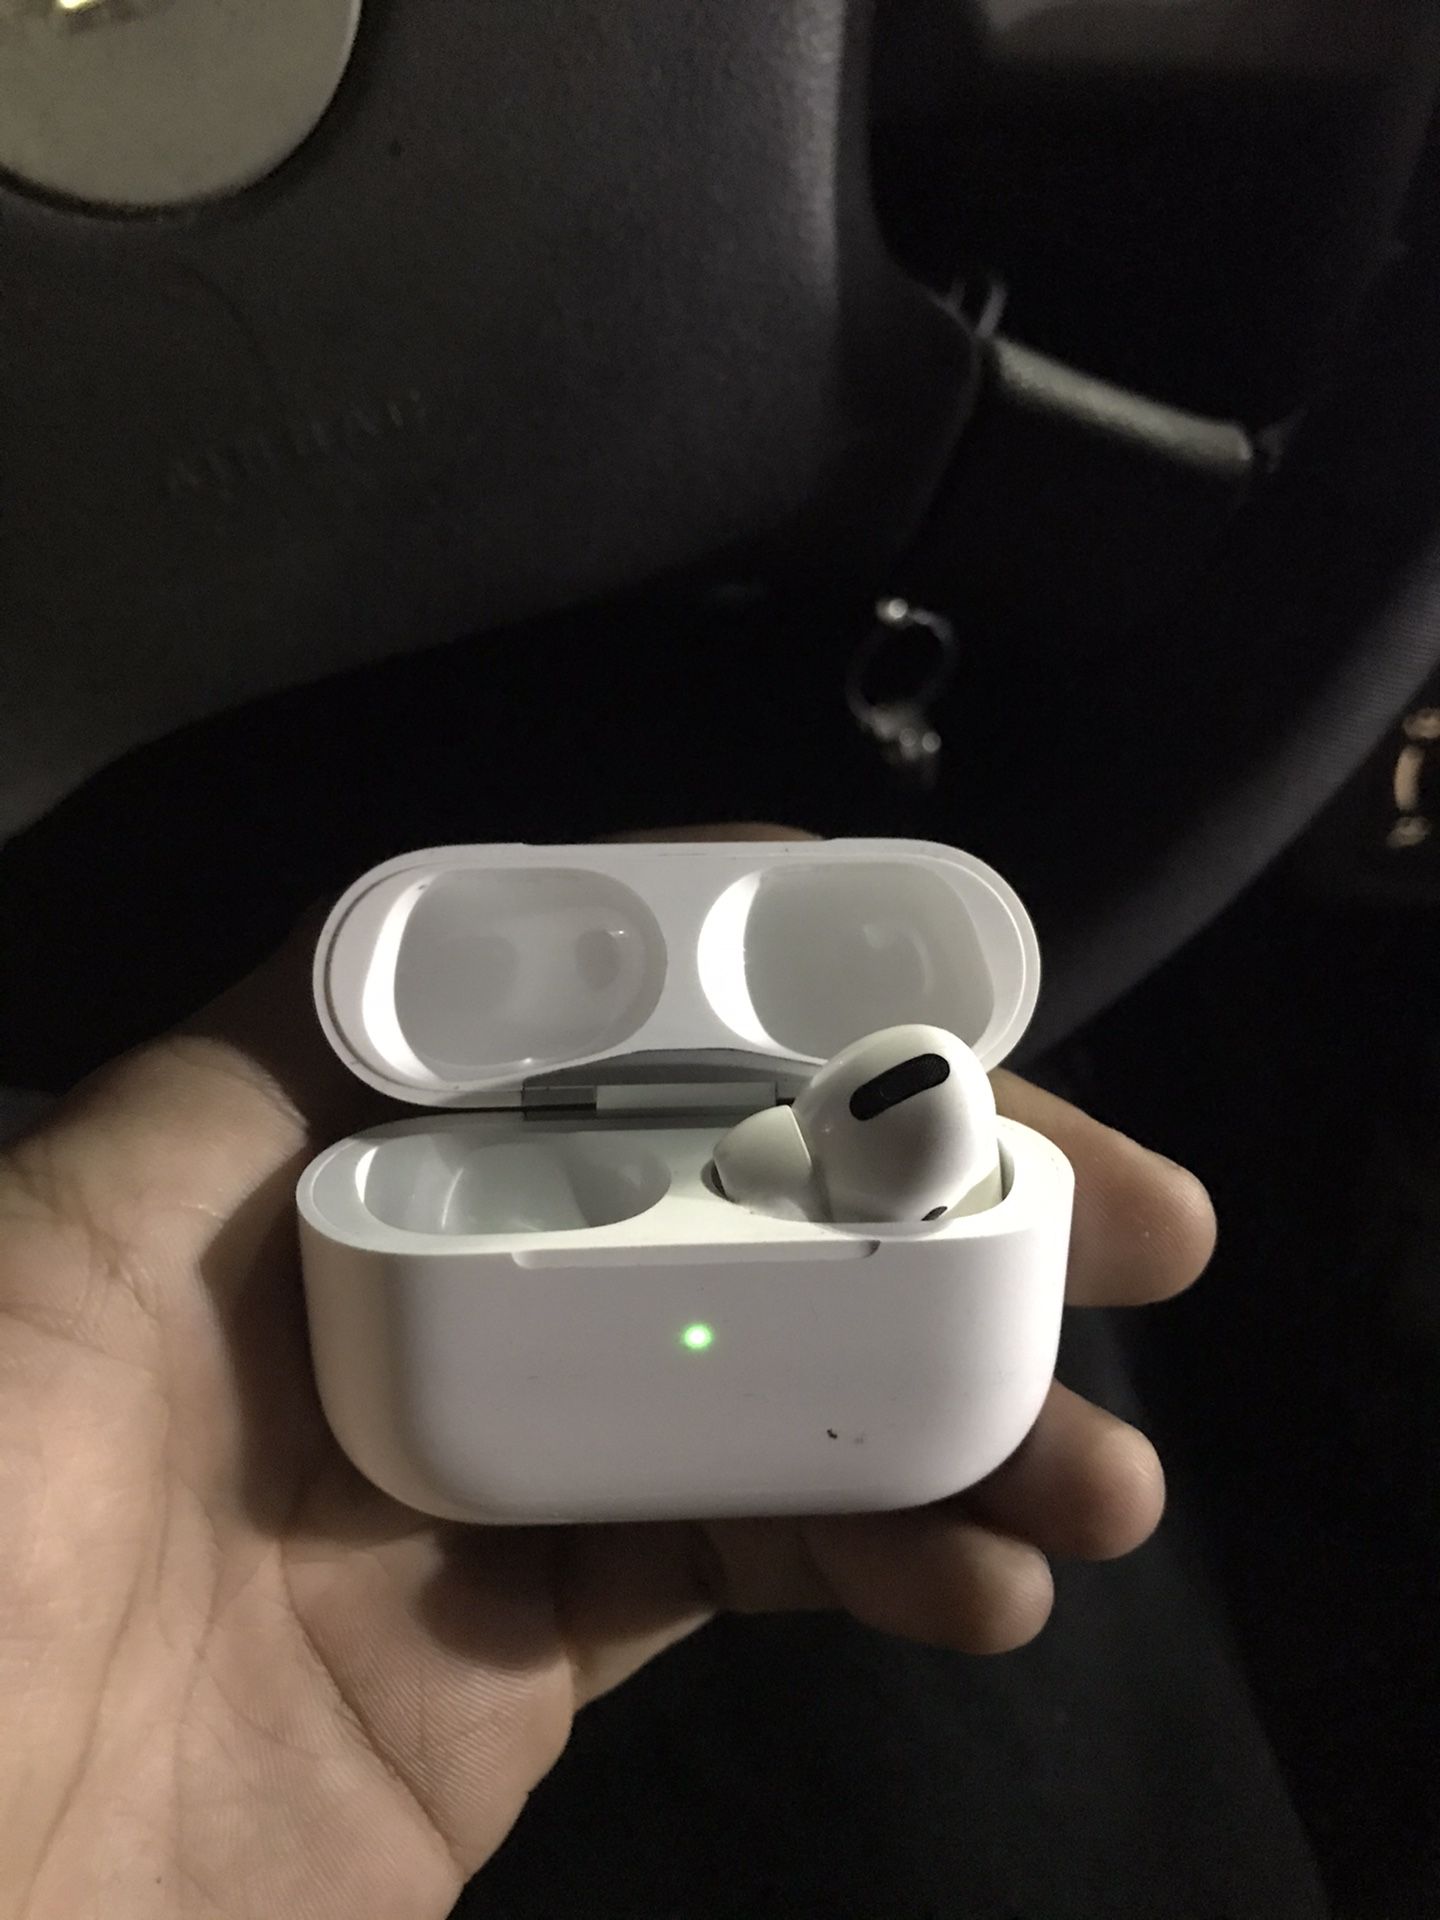 iPhone AirPod Pro charger n cord n right ear bud only